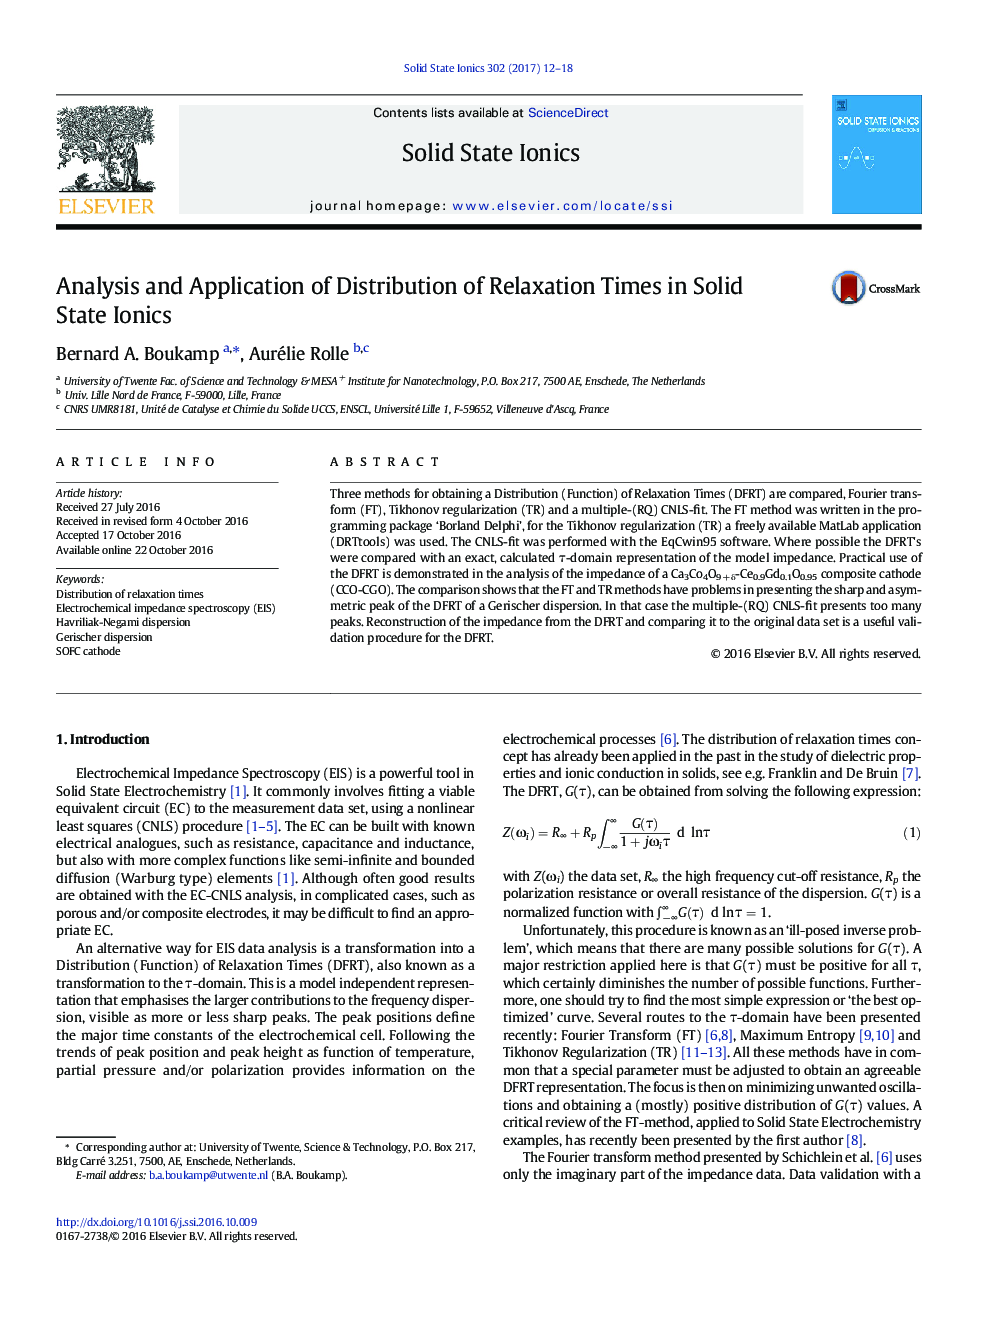 Analysis and Application of Distribution of Relaxation Times in Solid State Ionics